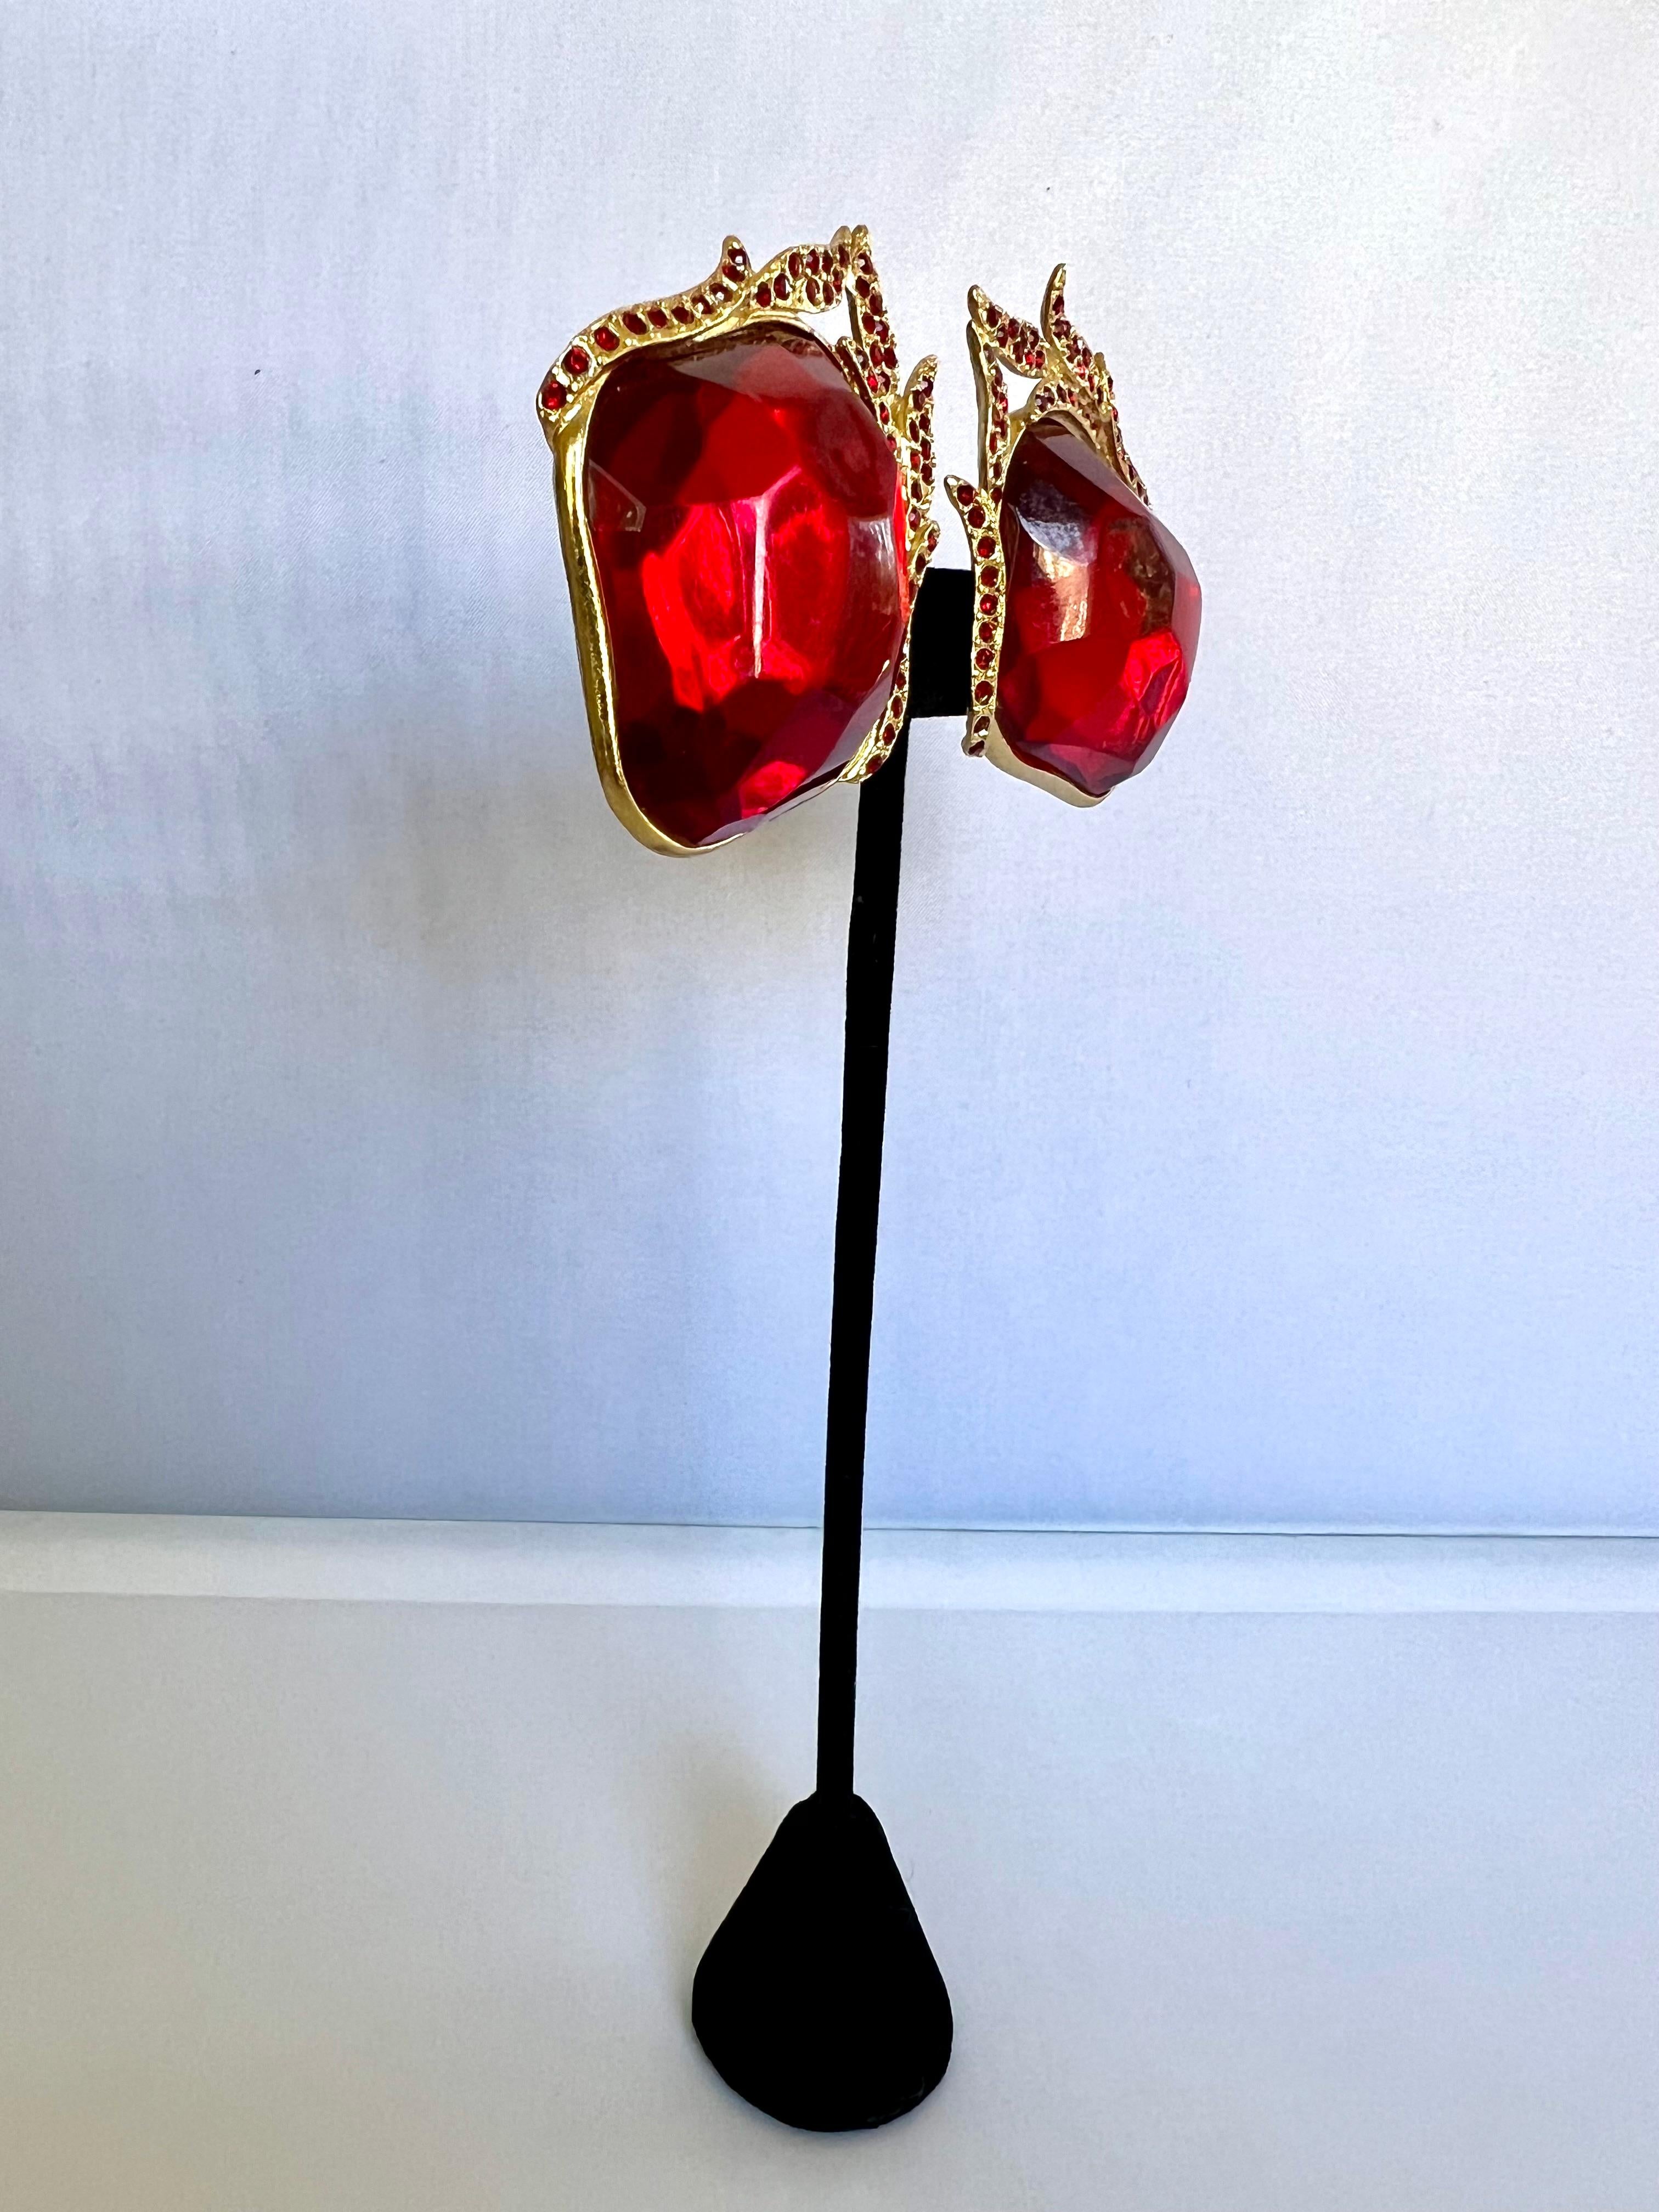 Yves Saint Laurent Vintage Red Flame Acrylic Earrings  In Good Condition For Sale In Palm Springs, CA